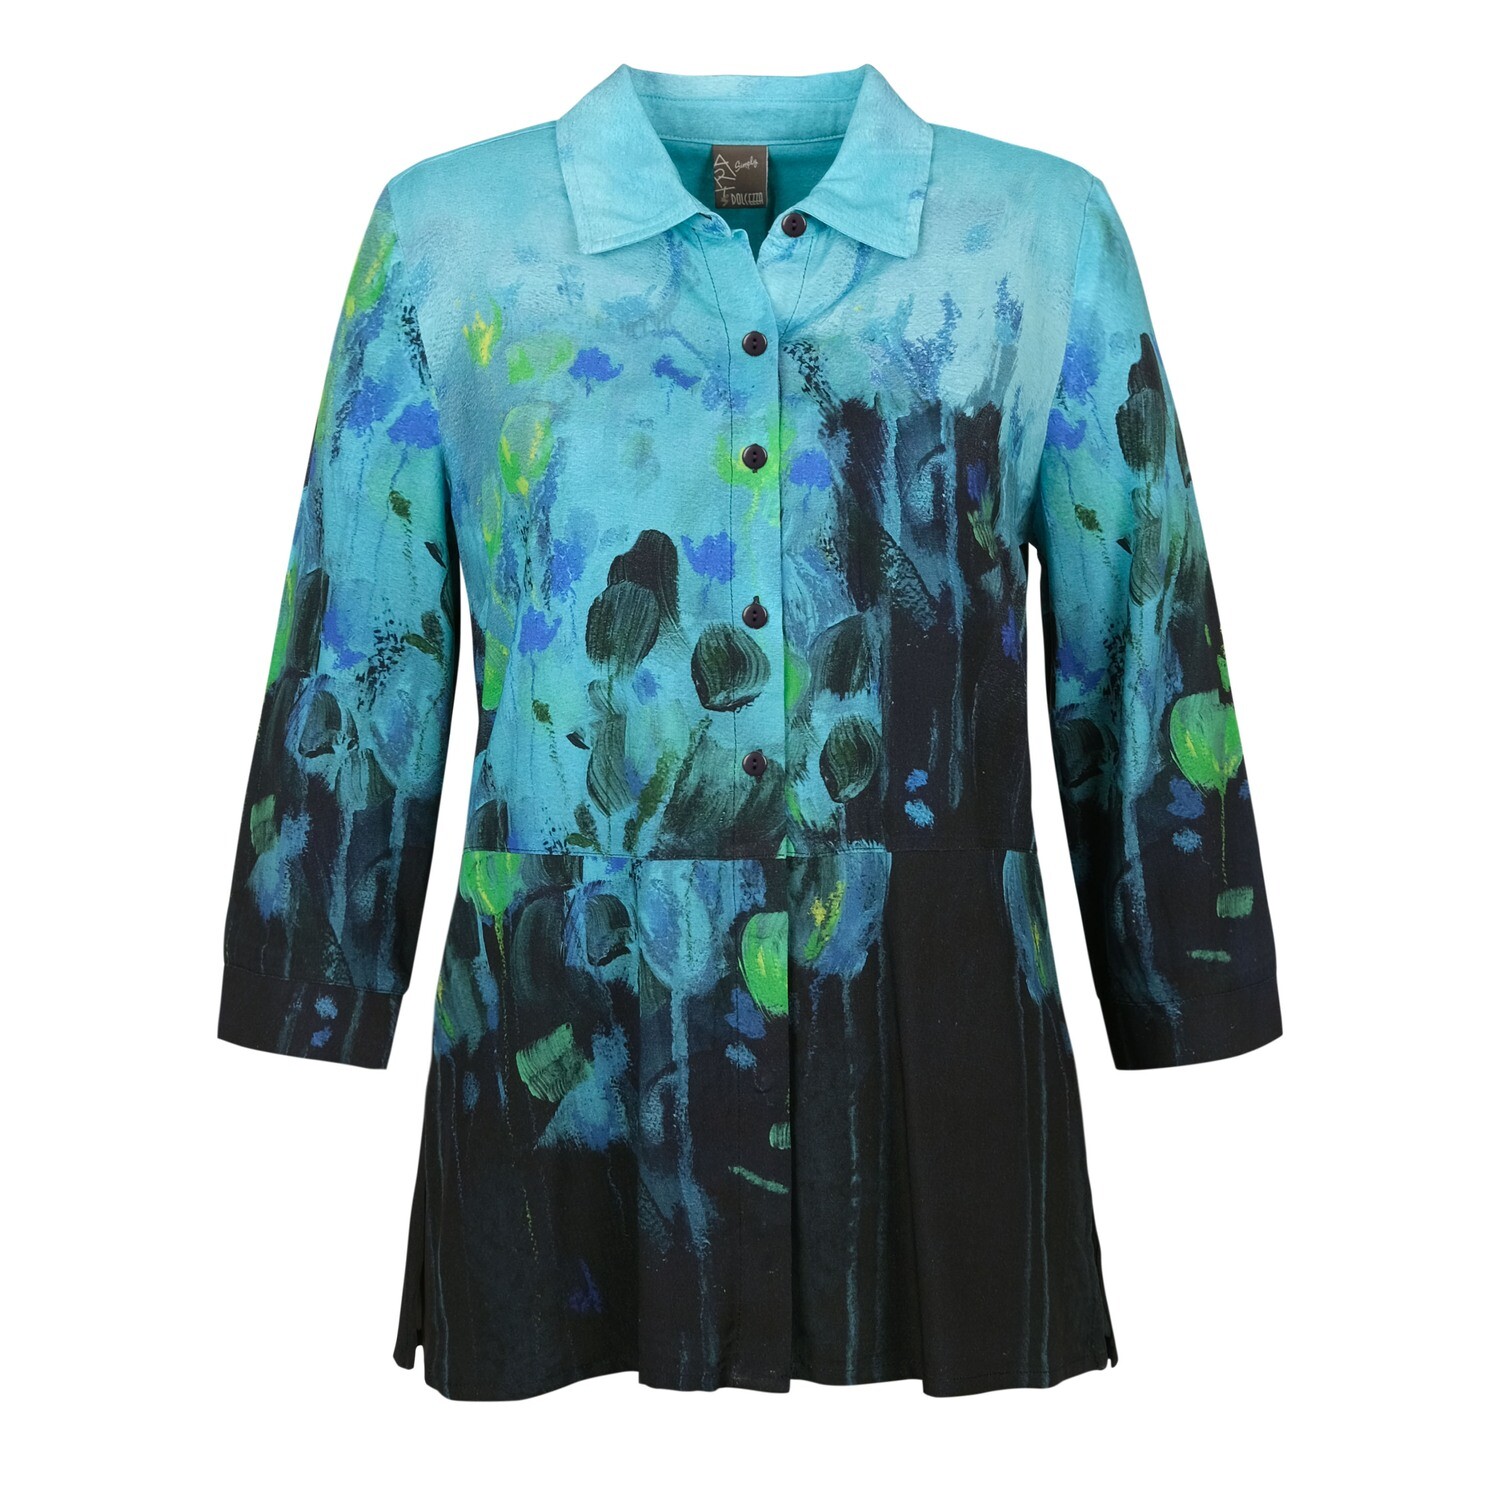 Simply Art Dolcezza: Fantaisie Floralge Abstract Art Buttoned Down Top SOLD OUT